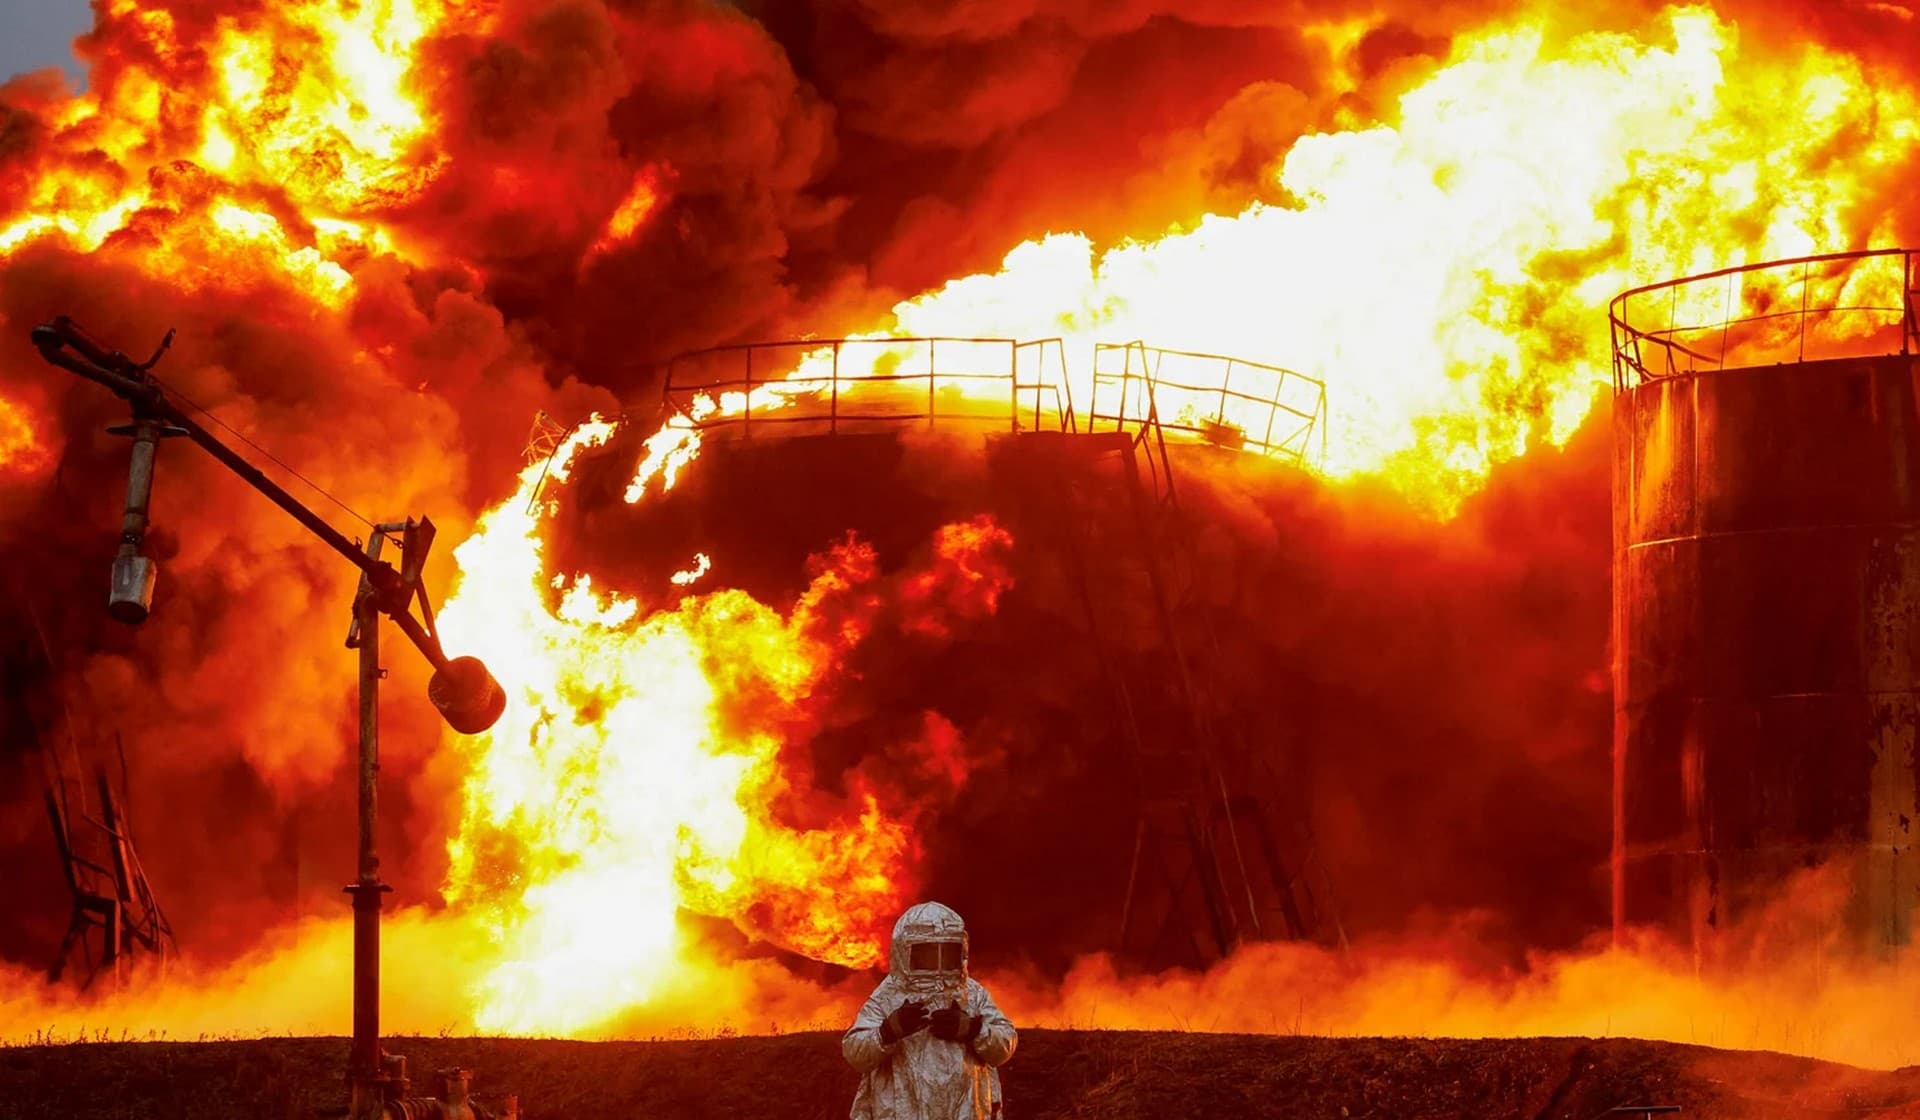 A firefighter works to extinguish fire following recent shelling at an oil storage facility in Shakhtarsk